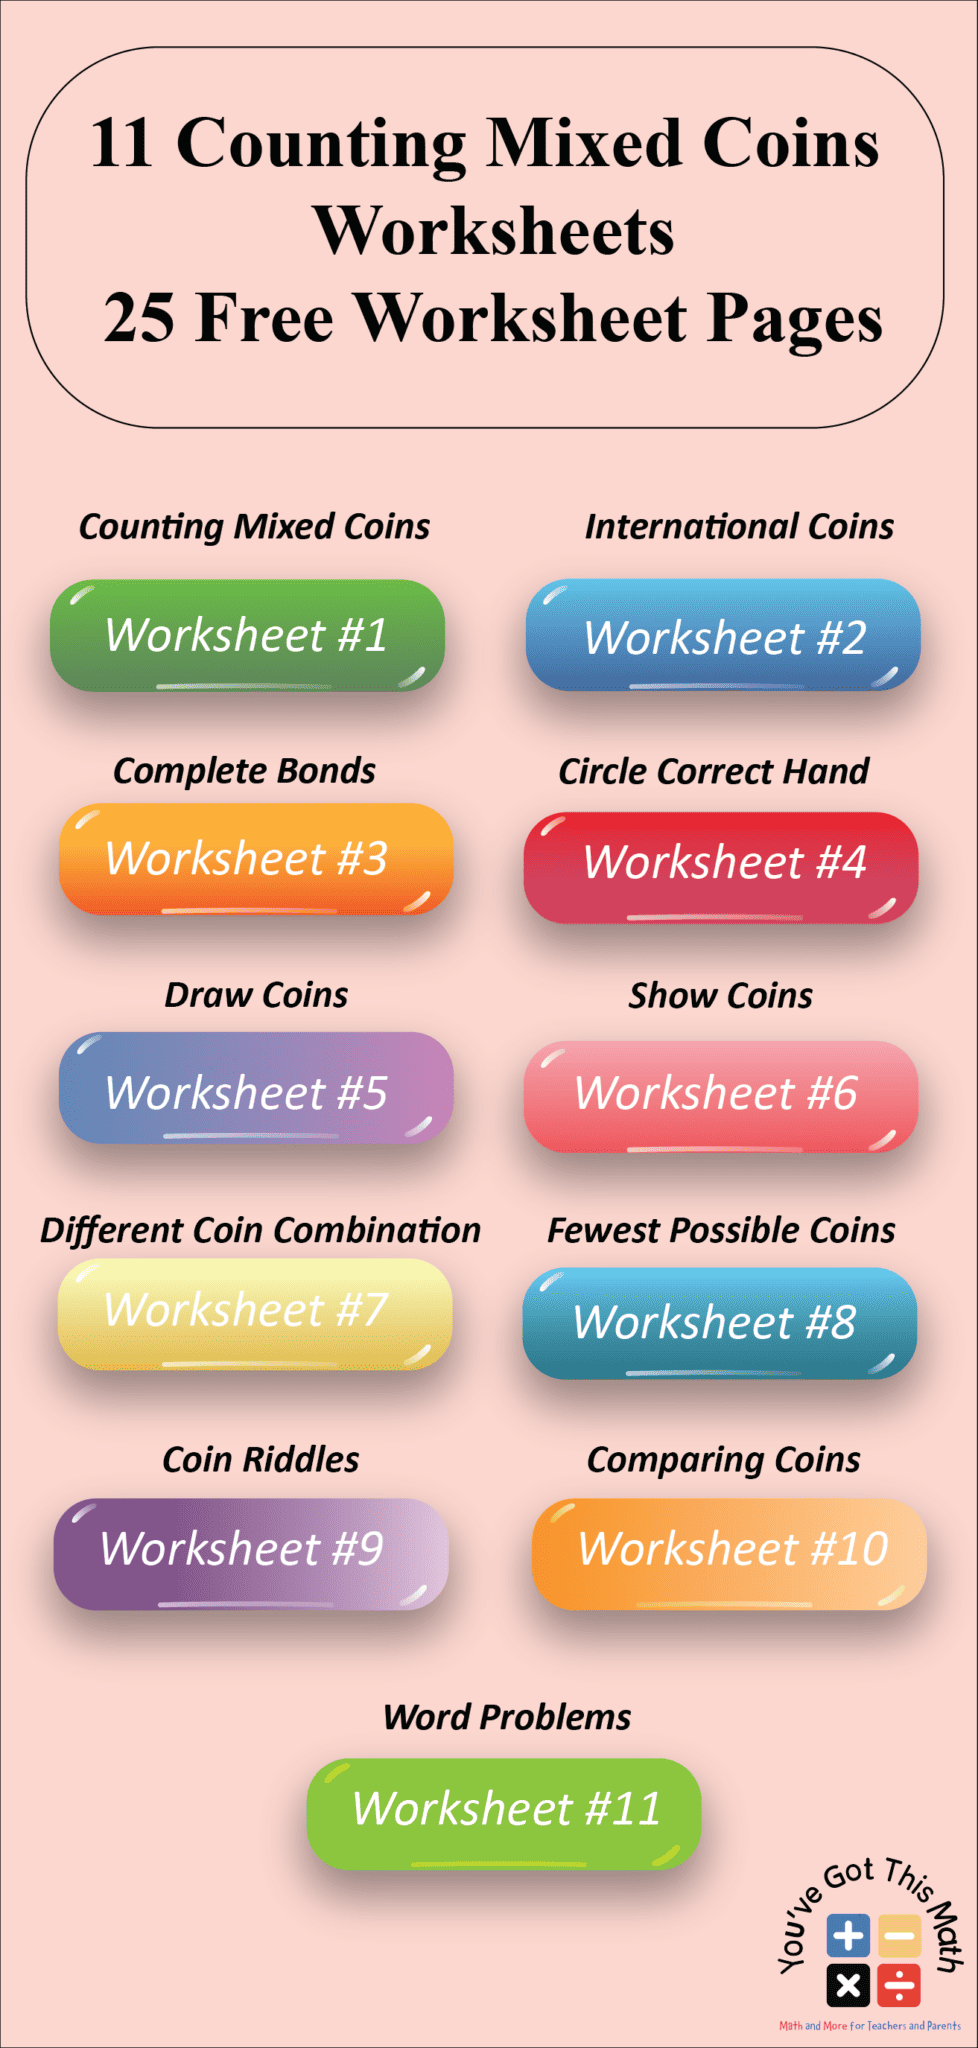 11-free-counting-mixed-coins-worksheets-fun-activities